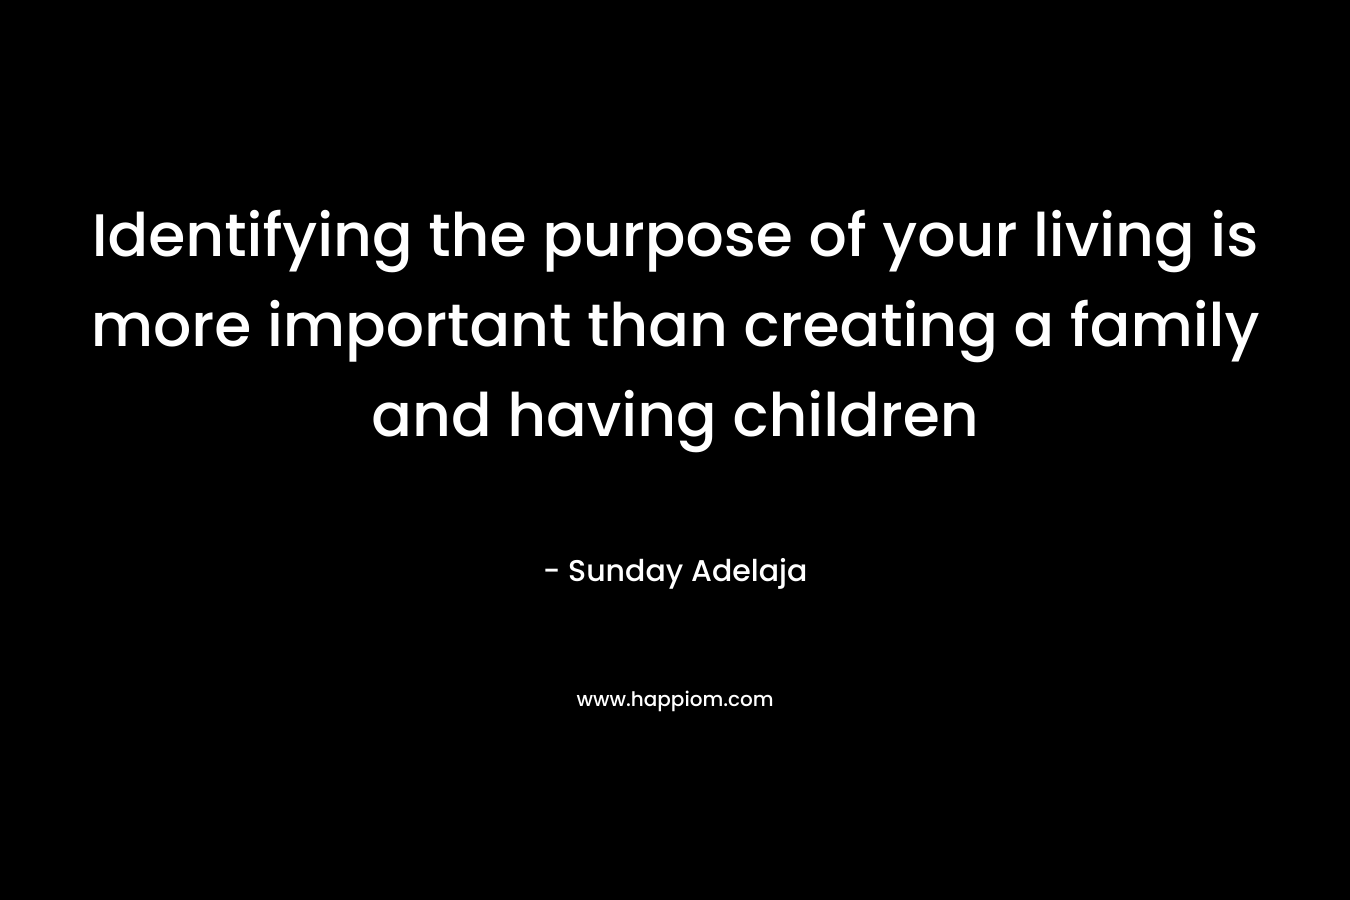 Identifying the purpose of your living is more important than creating a family and having children